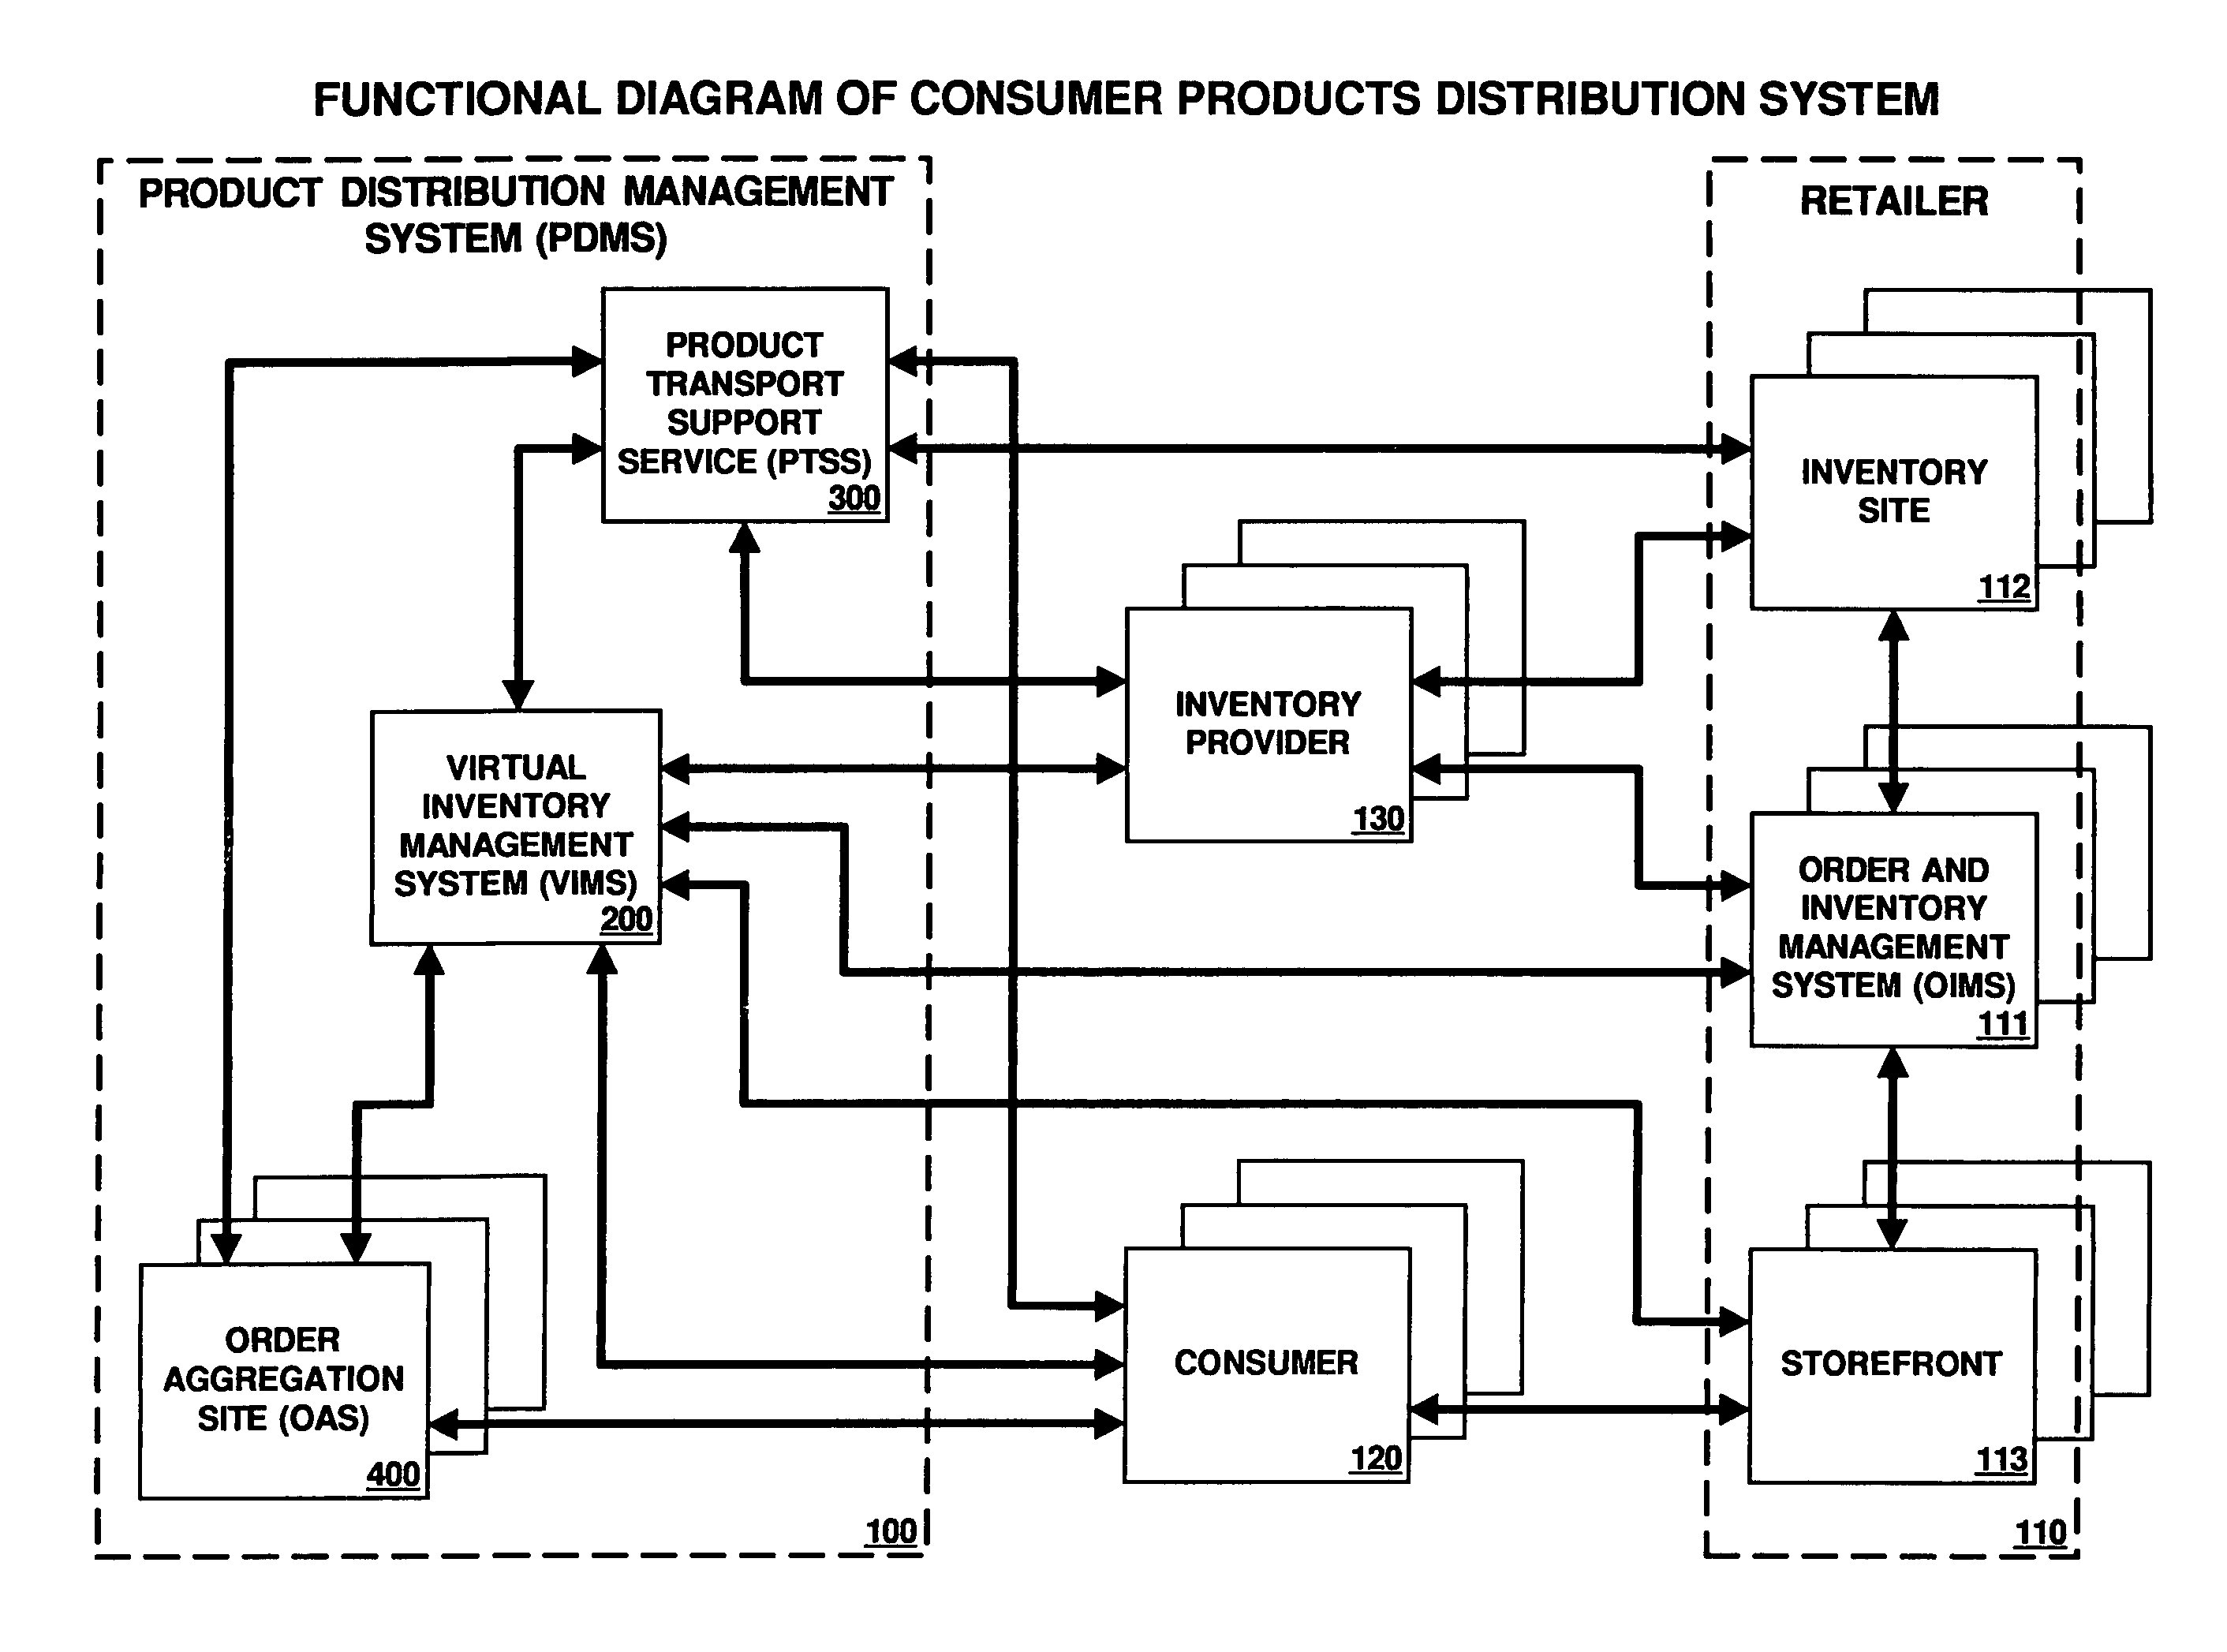 Consumer products distribution system